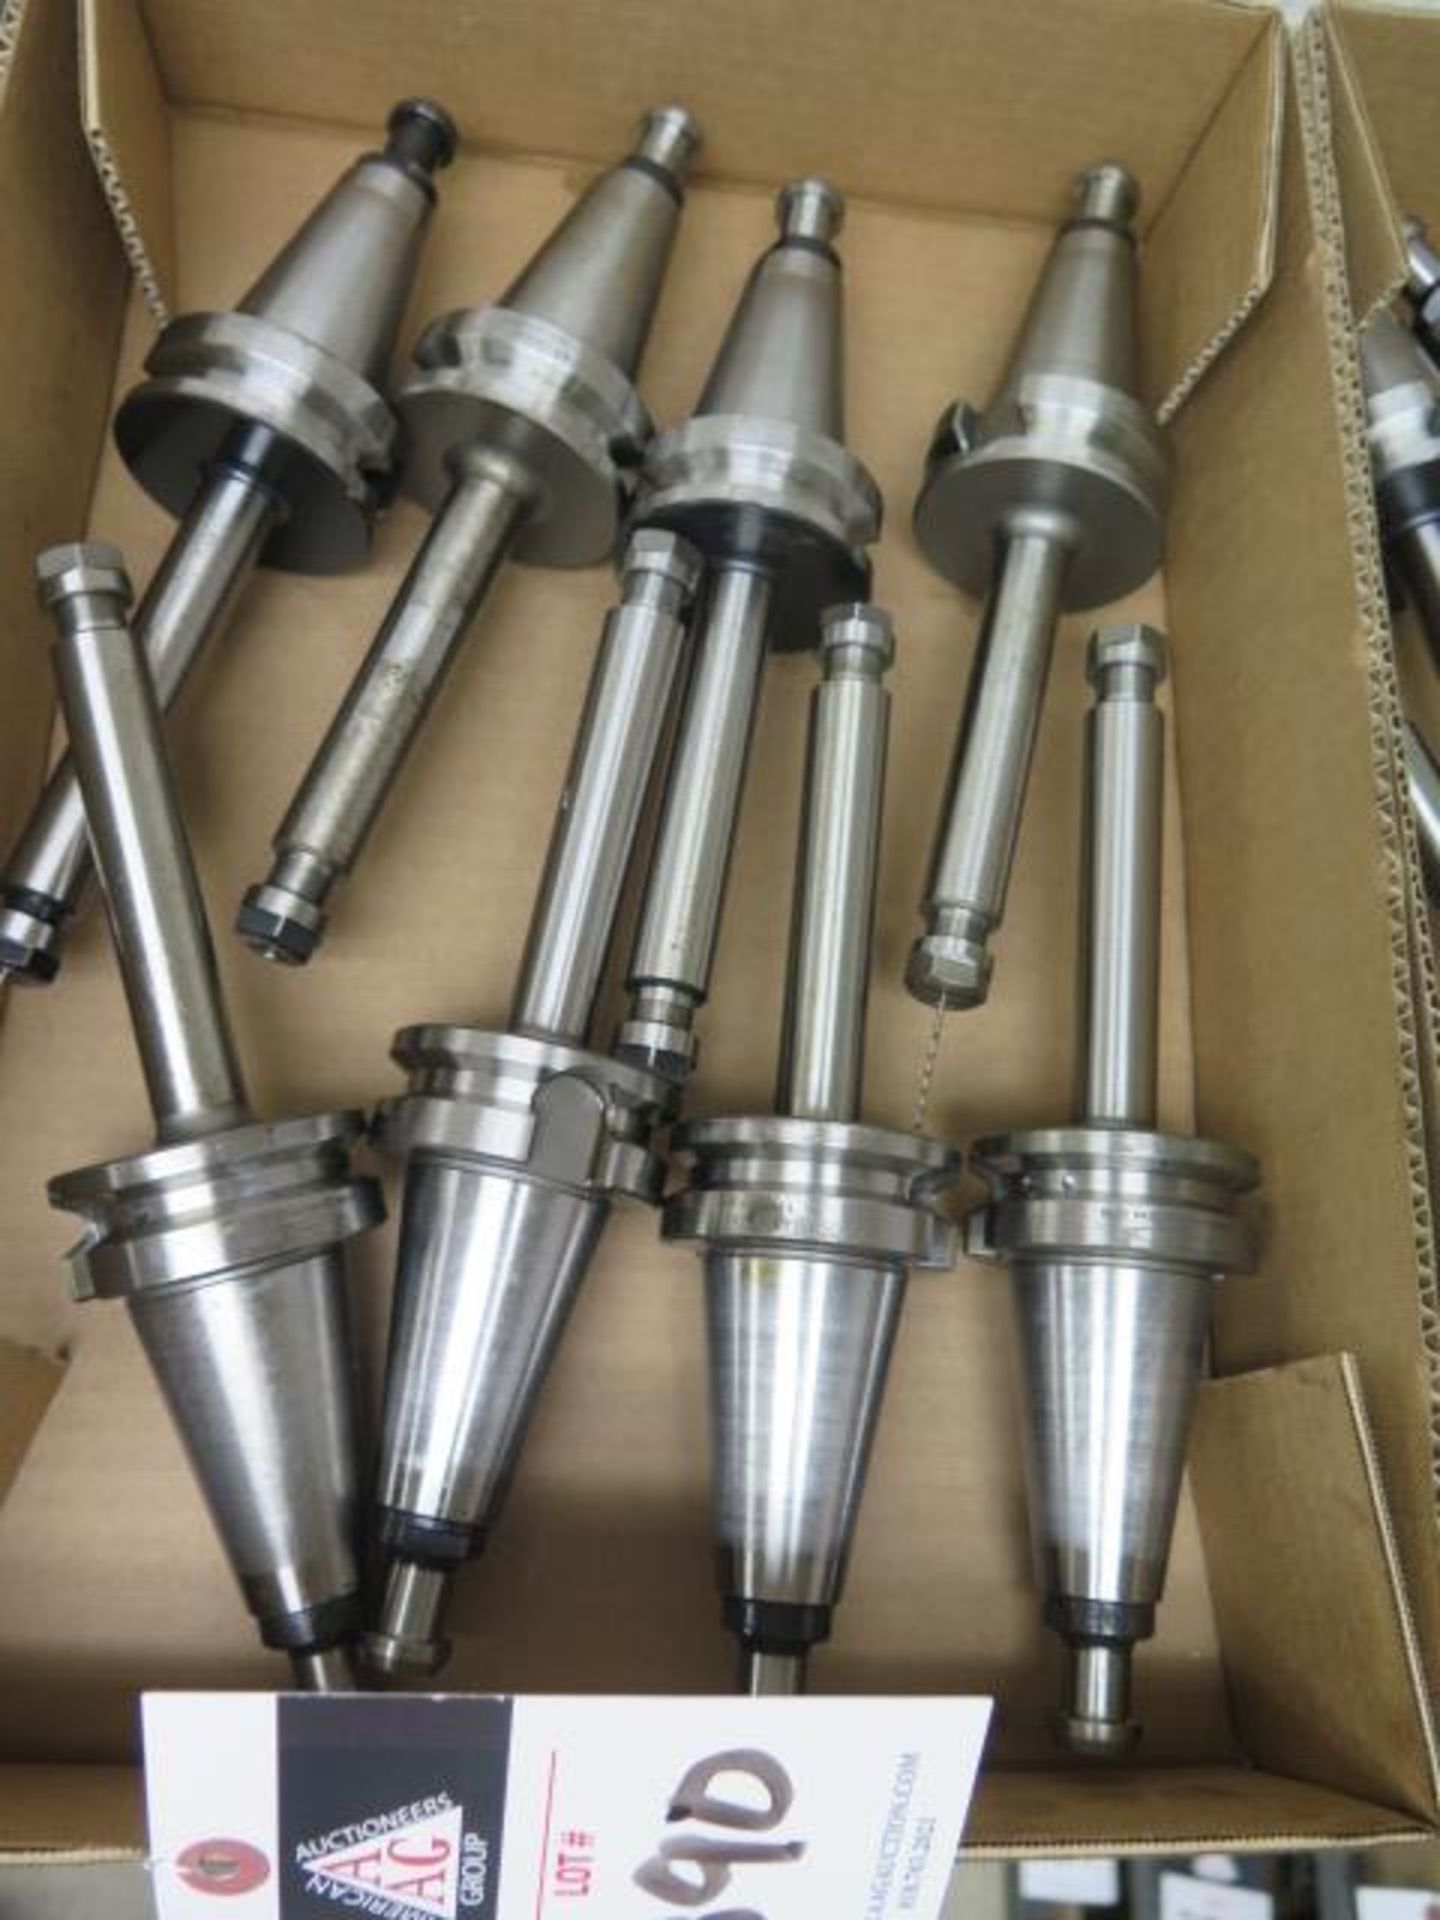 Lyndex BT-40 Taper 18,000 RPM Balanced ER11 5" Length Collet Chucks (8) (SOLD AS-IS - NO WARRANTY) - Image 2 of 5